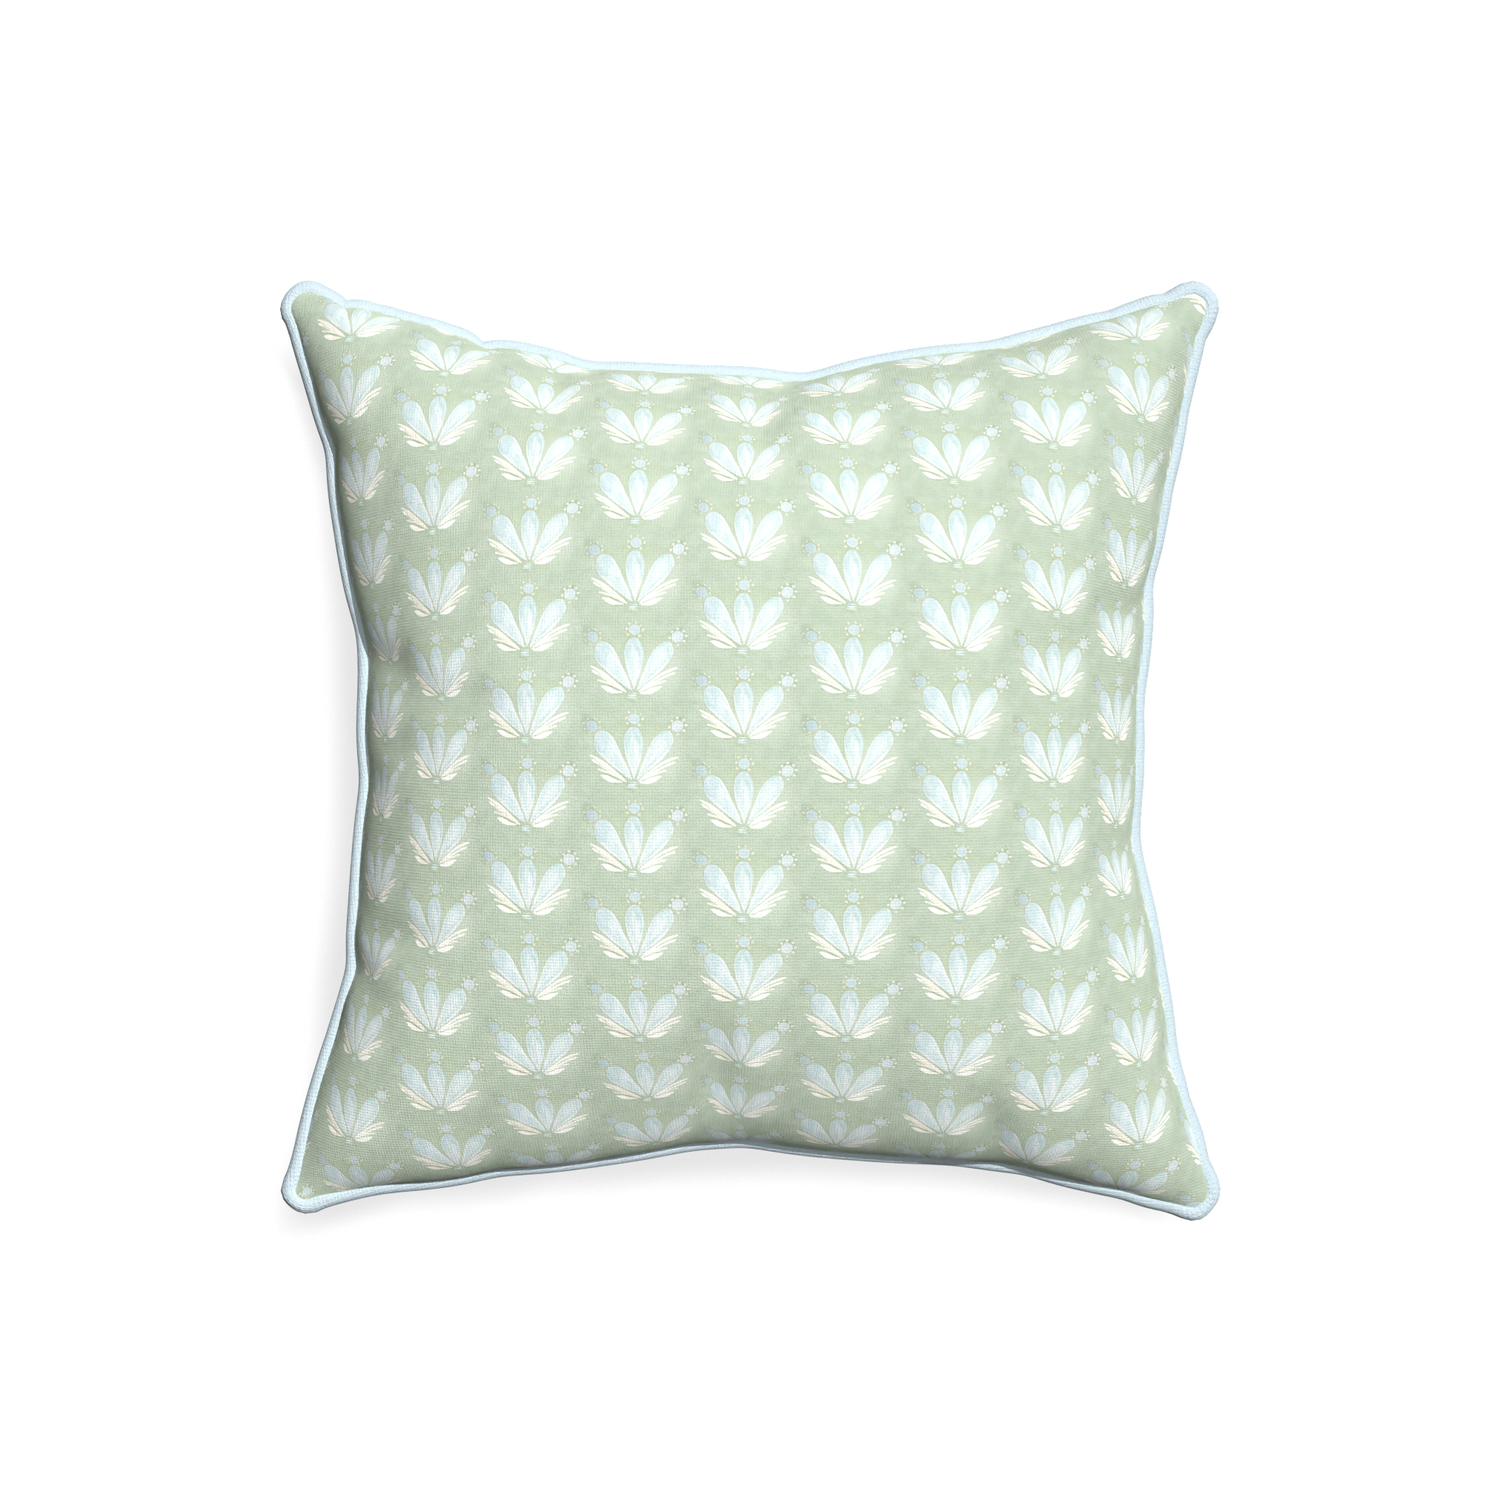 20-square serena sea salt custom blue & green floral drop repeatpillow with powder piping on white background